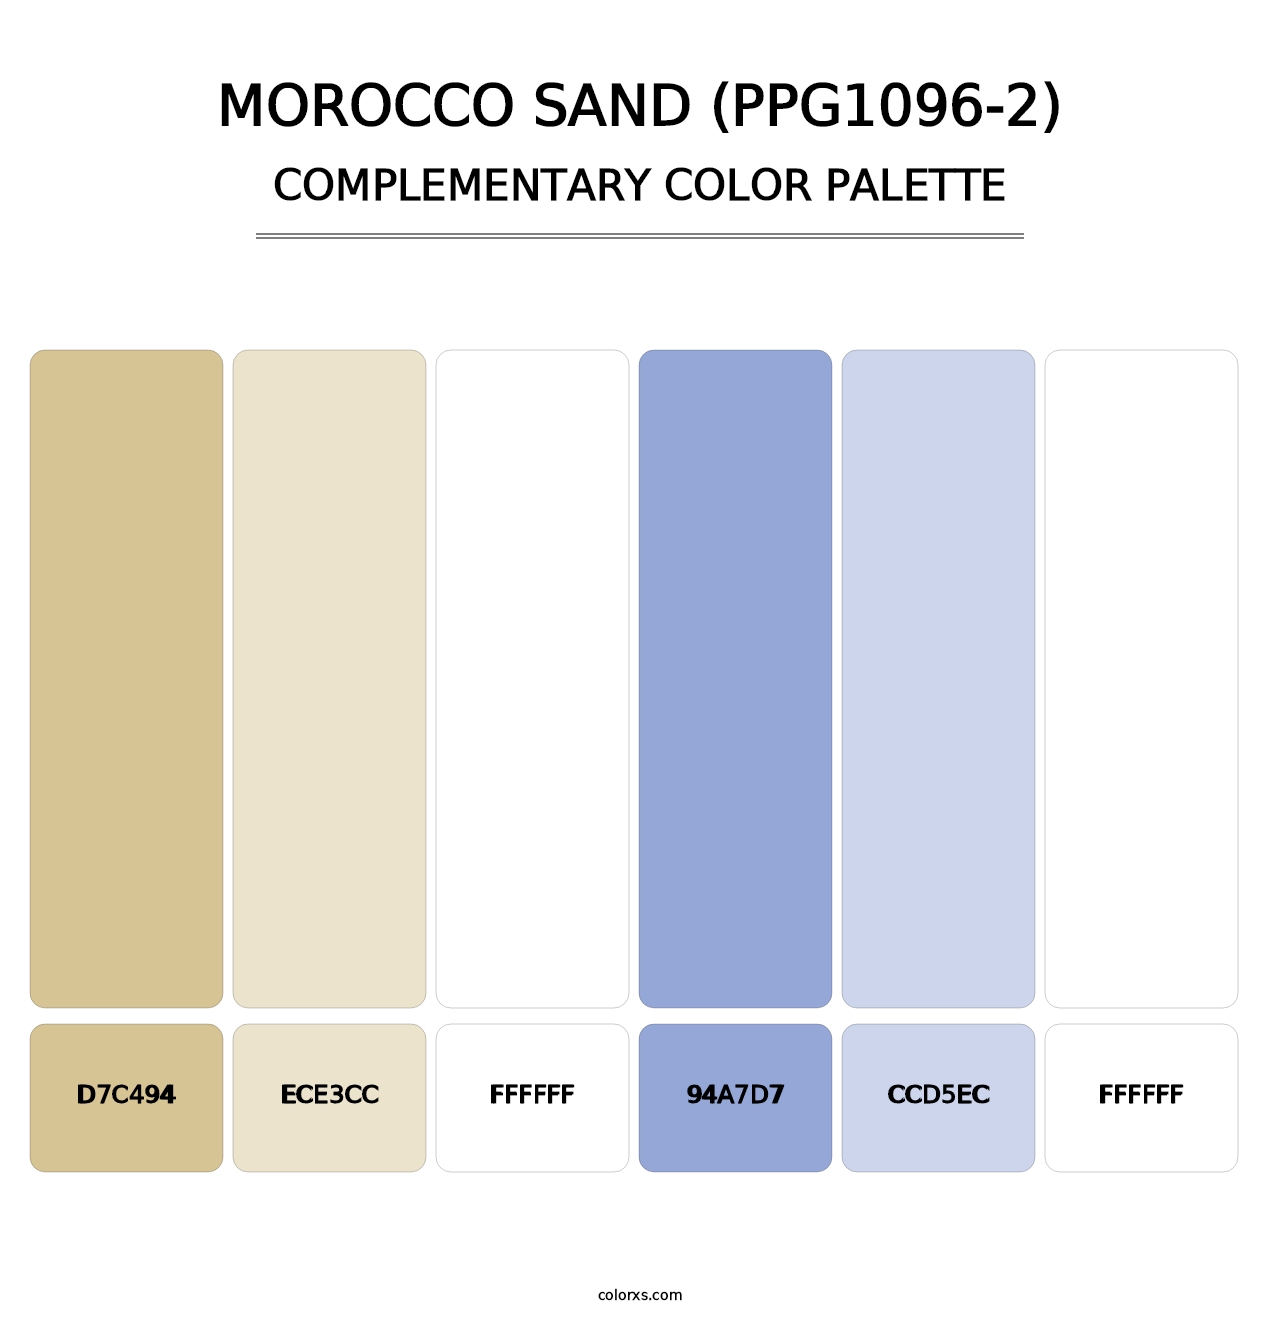 Morocco Sand (PPG1096-2) - Complementary Color Palette